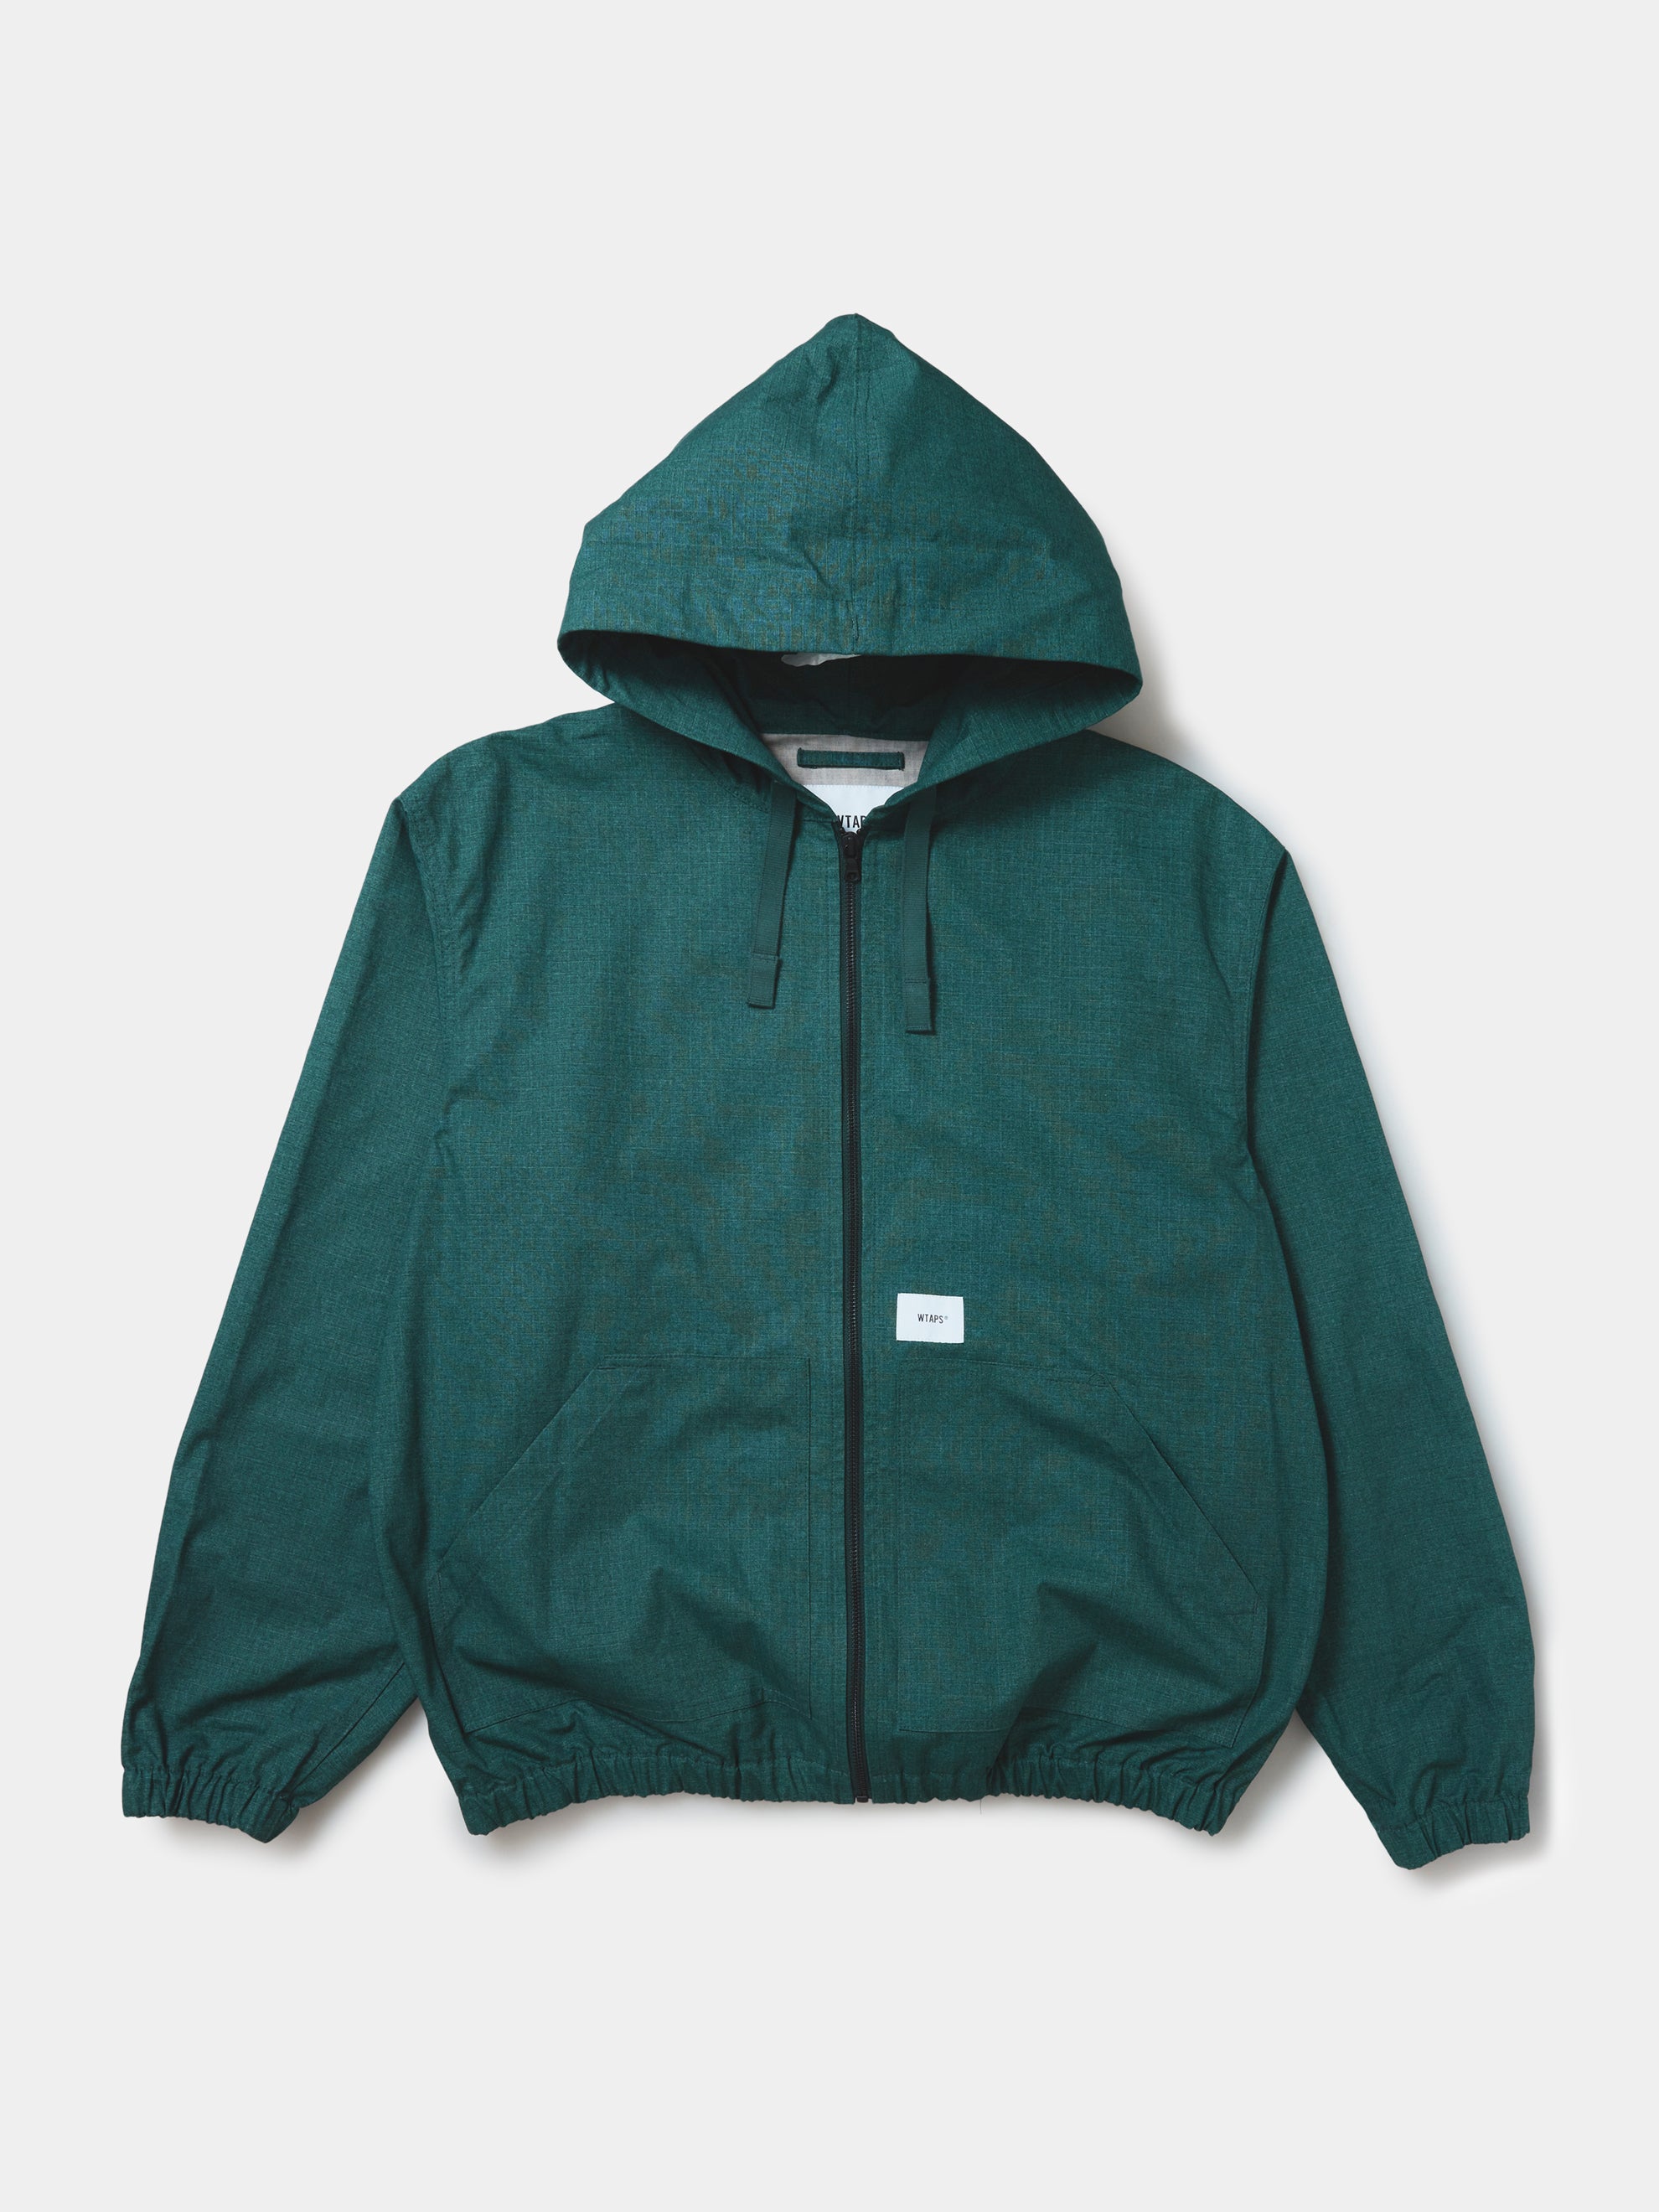 Buy Wtaps PAB / JACKET / COTTON. RIPSTOP Online at UNION LOS ANGELES